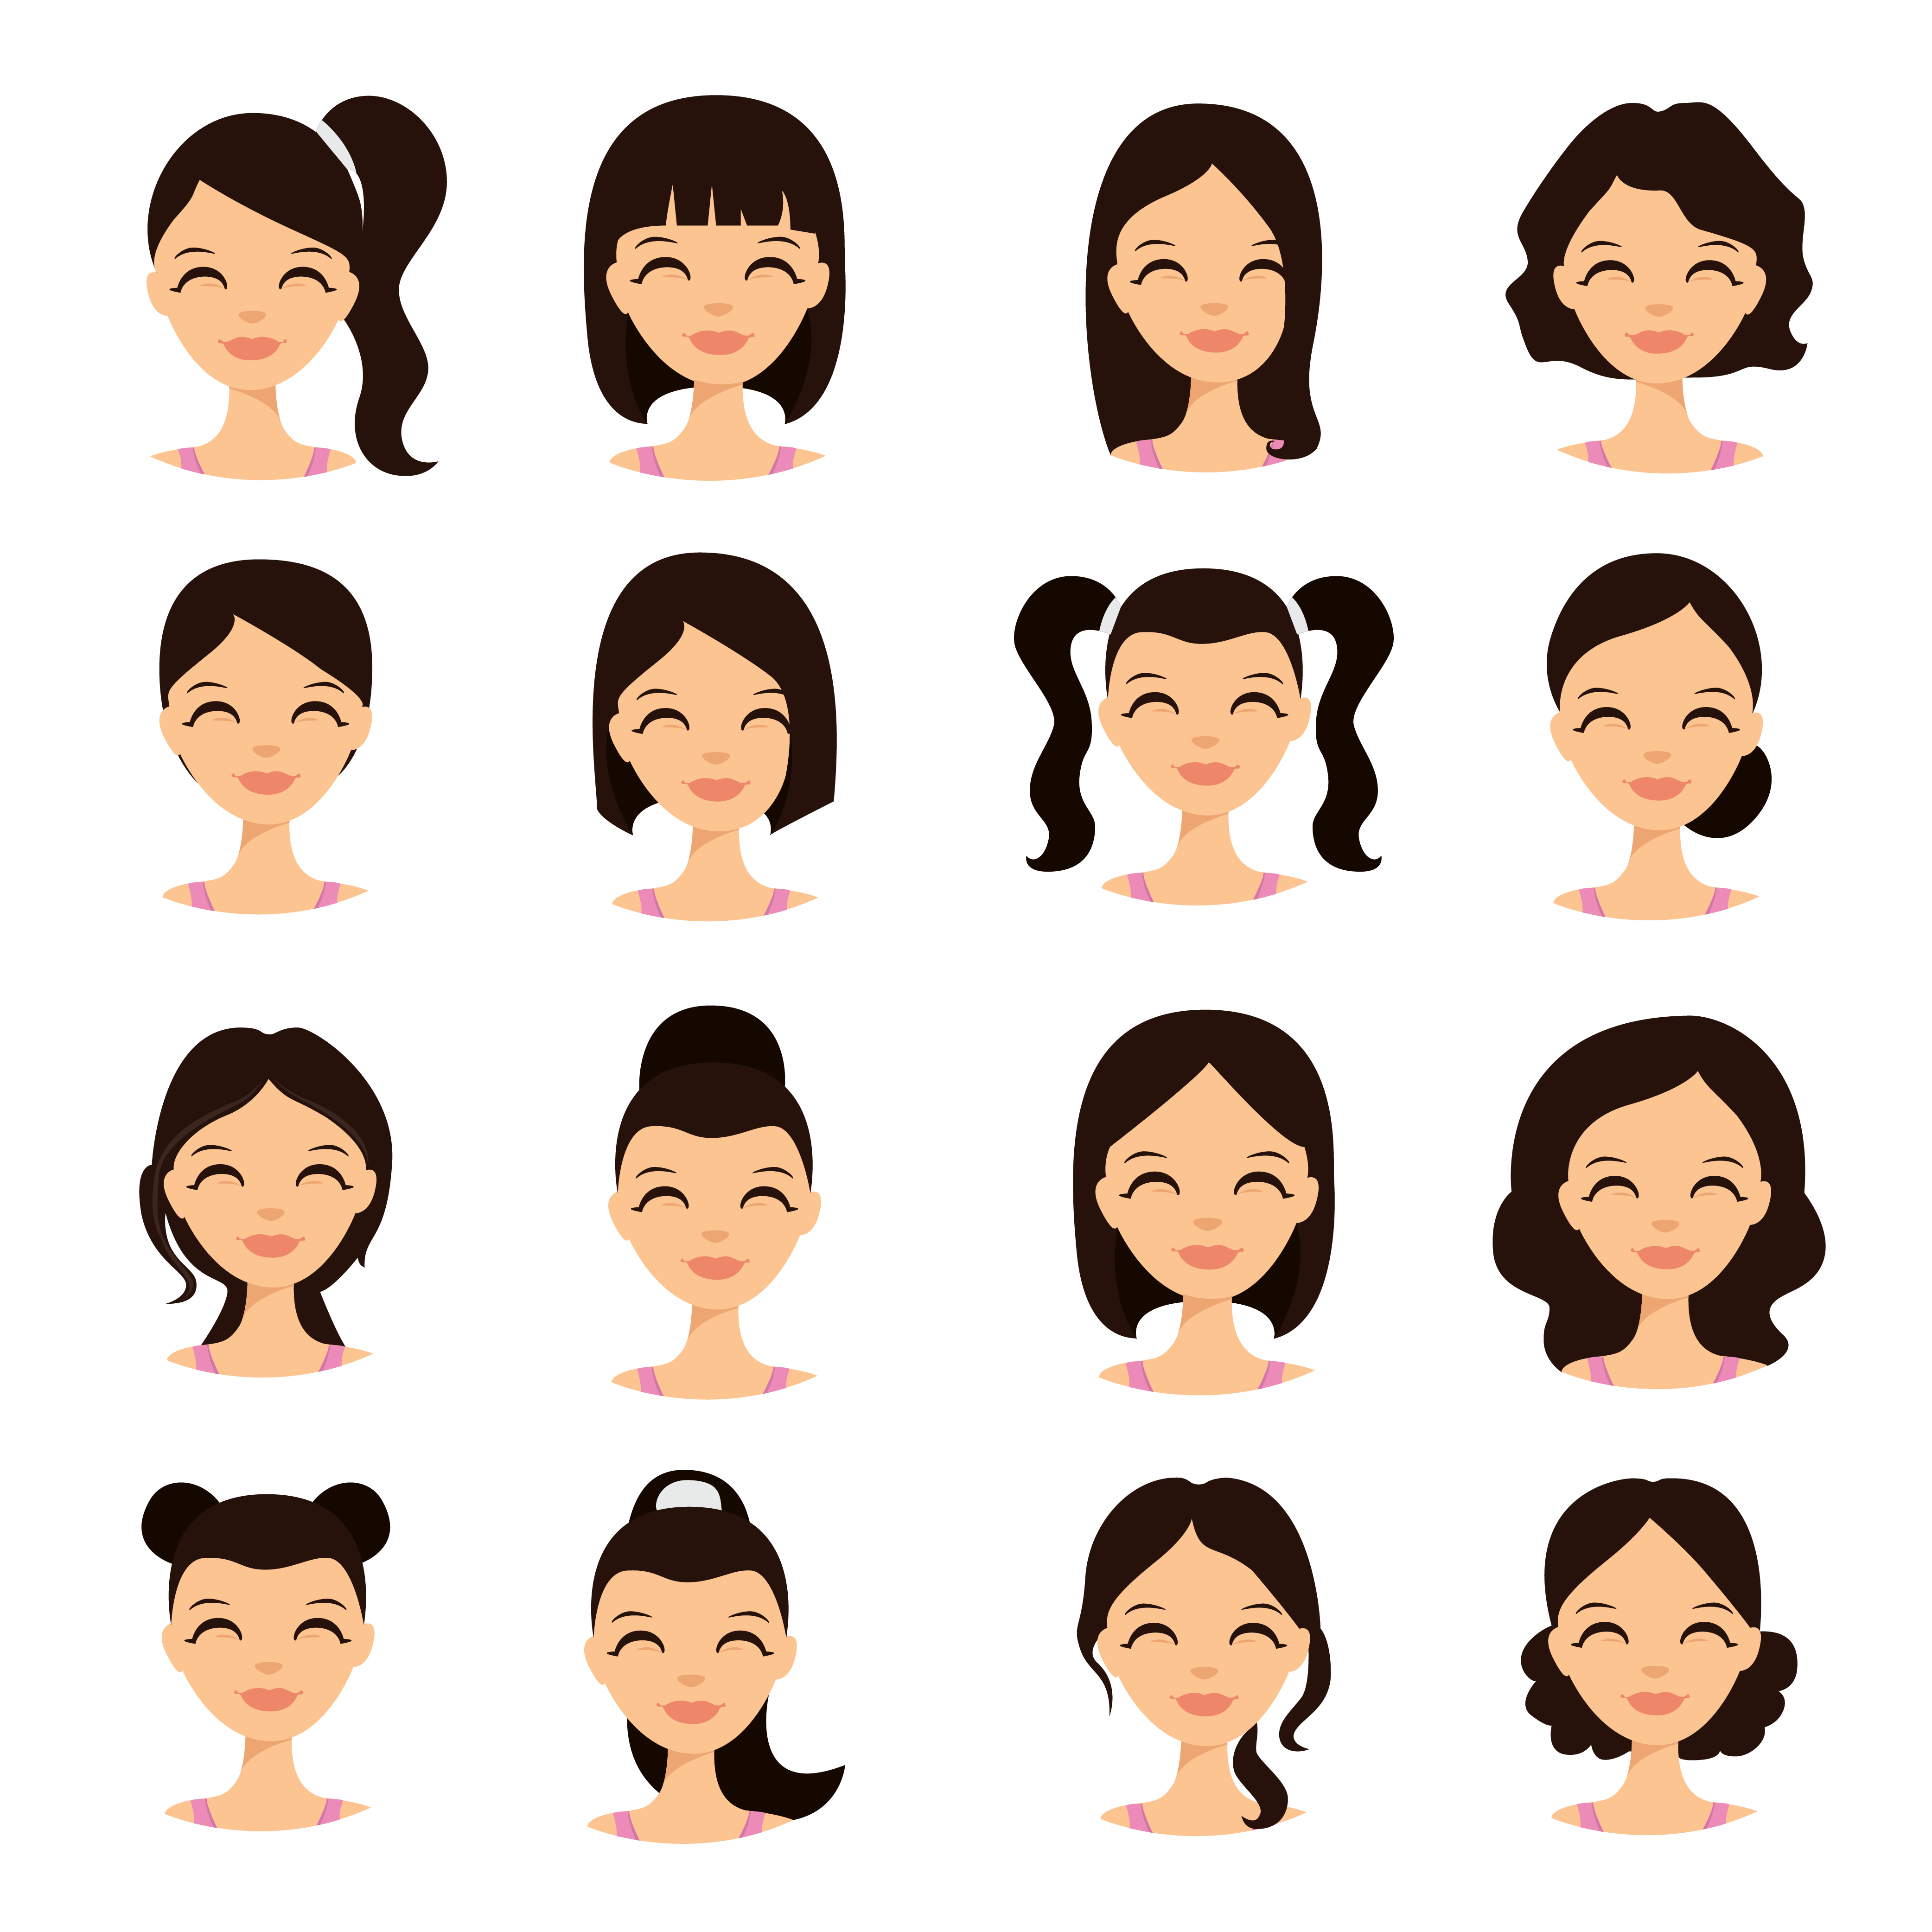 Young pretty women pretty faces with different hairstyles. Cartoon